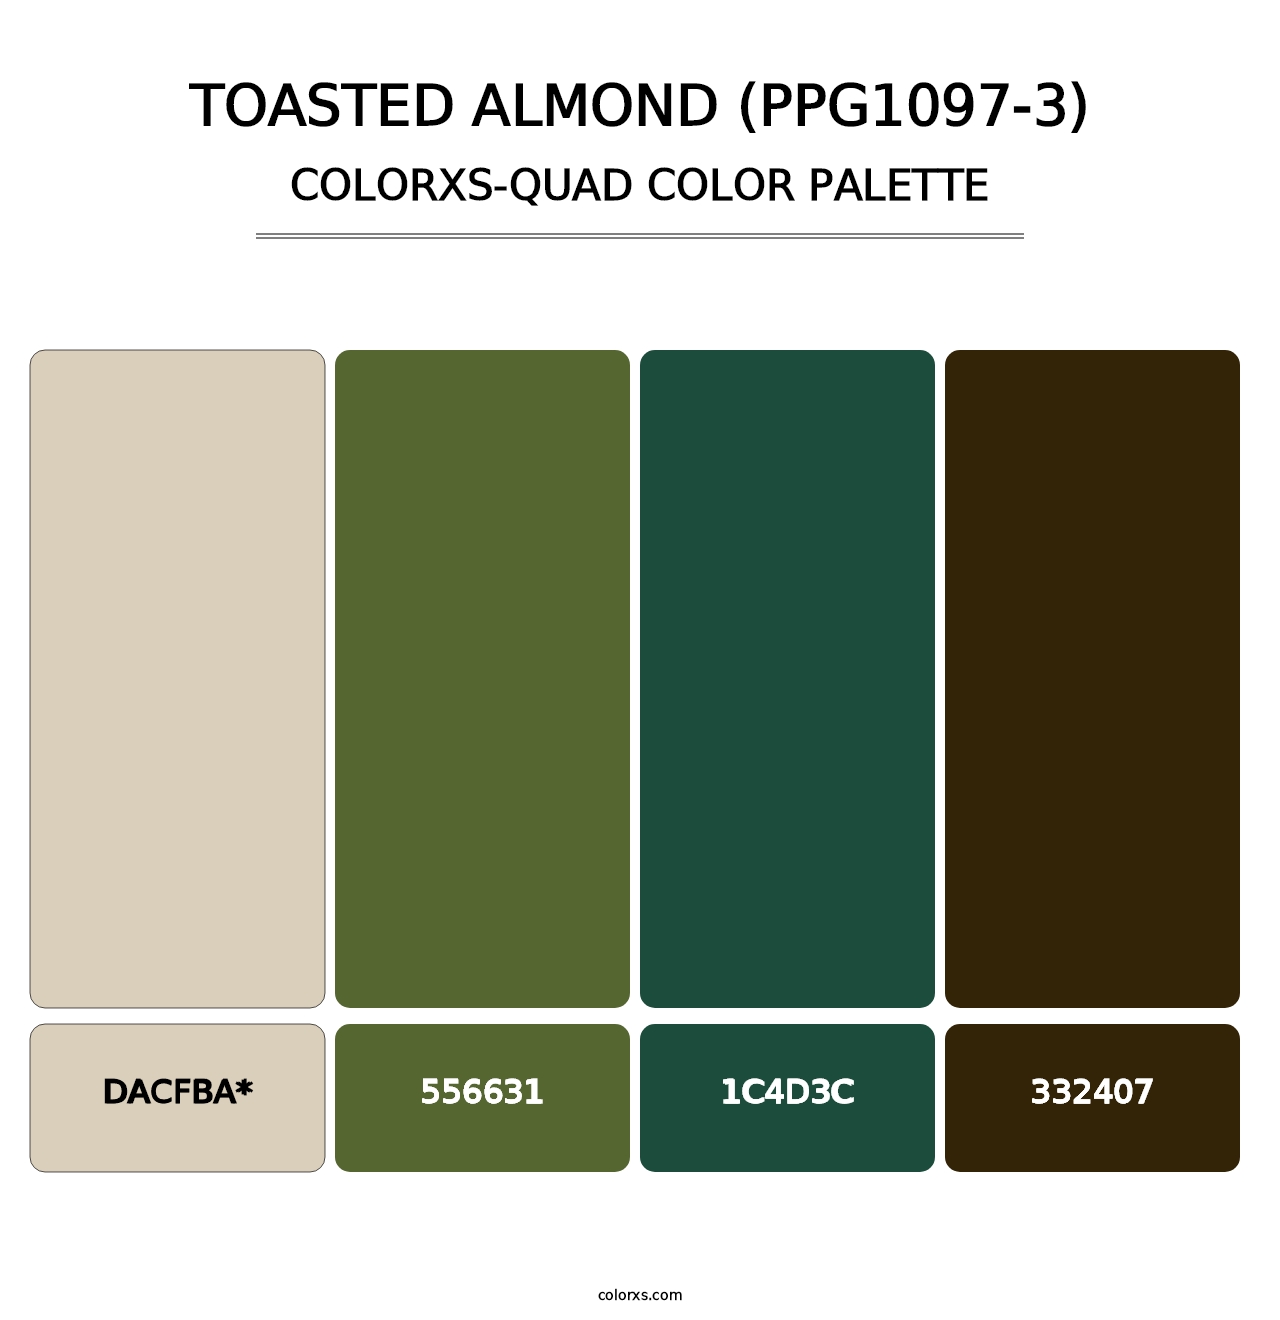 Toasted Almond (PPG1097-3) - Colorxs Quad Palette